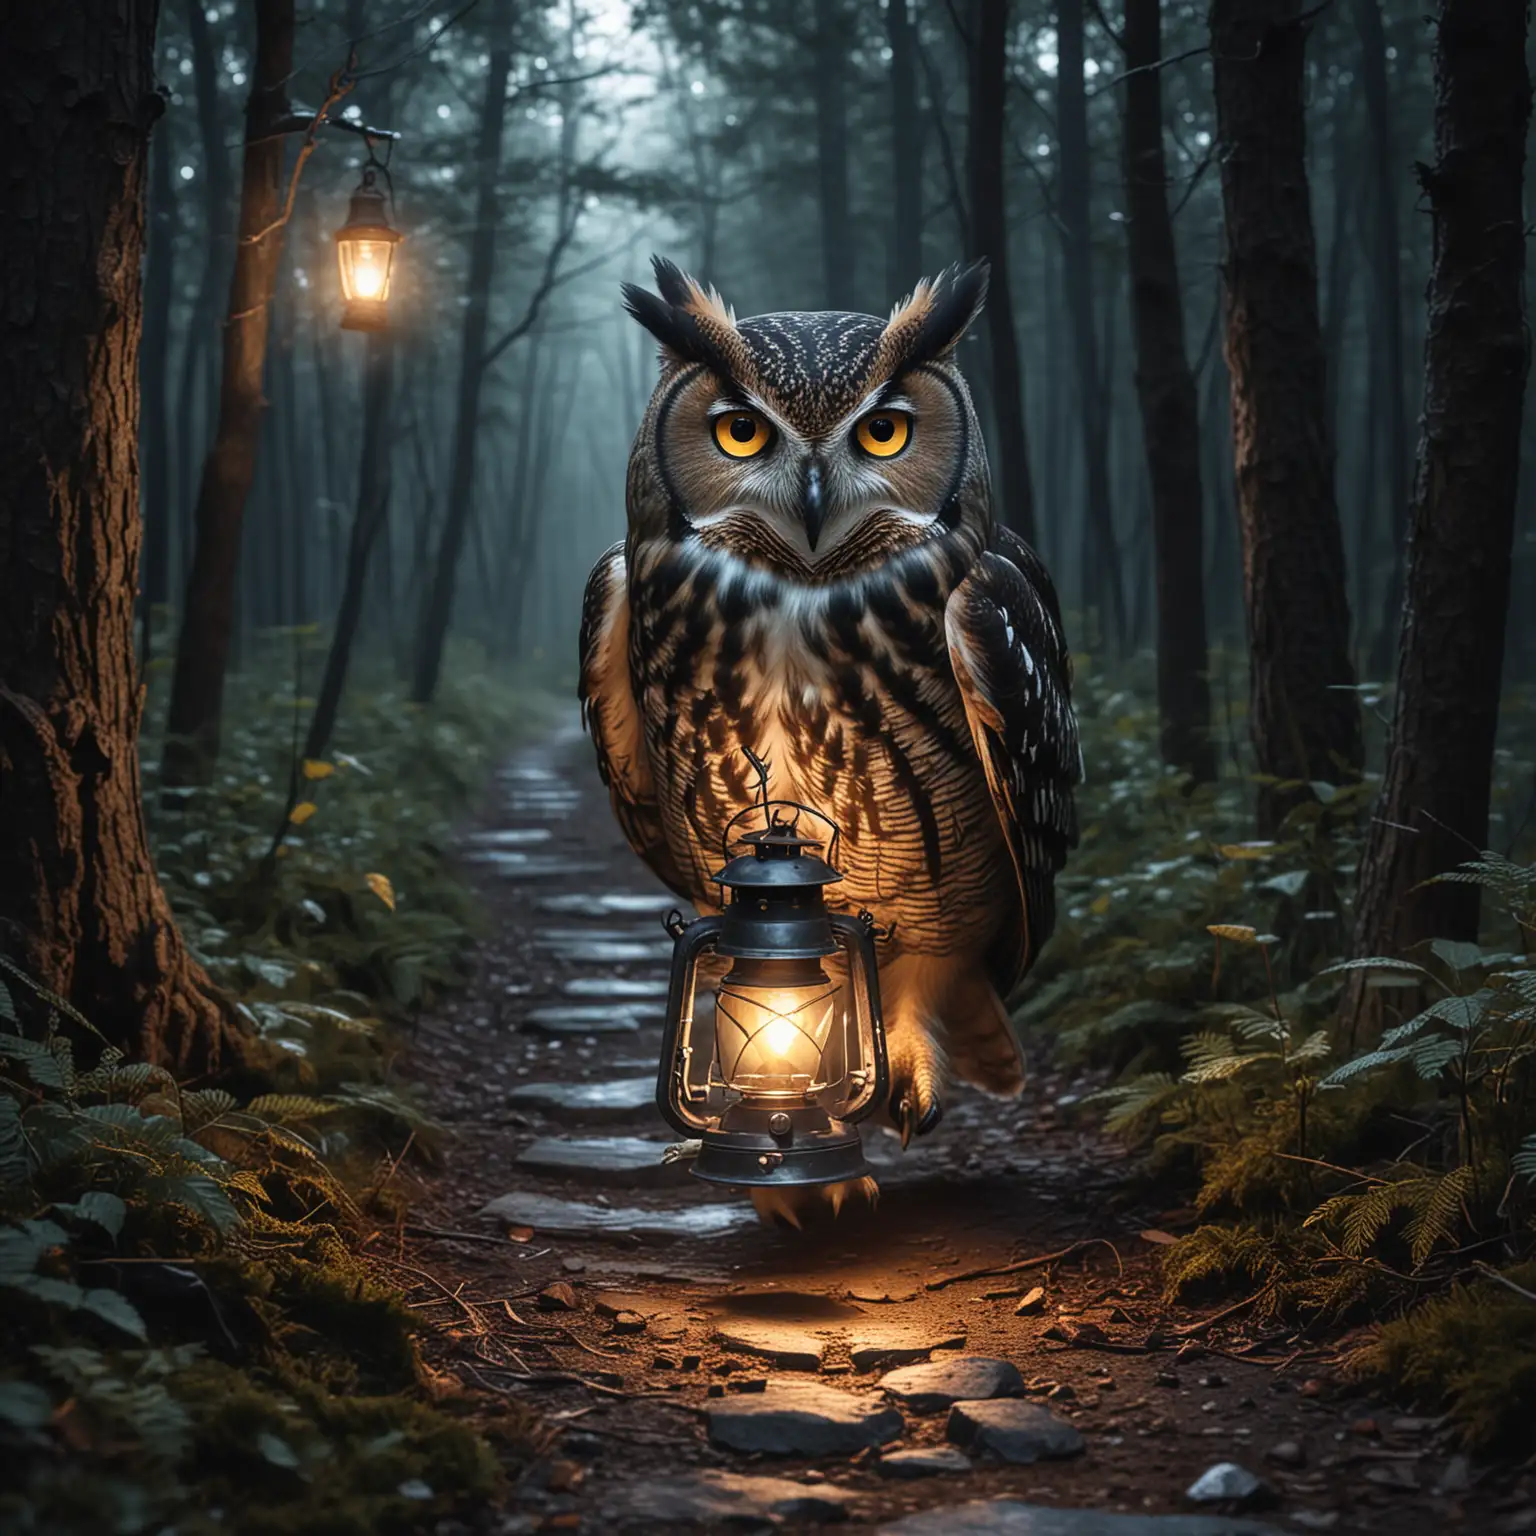 An owl with a lantern, lighting up a dark forest path.